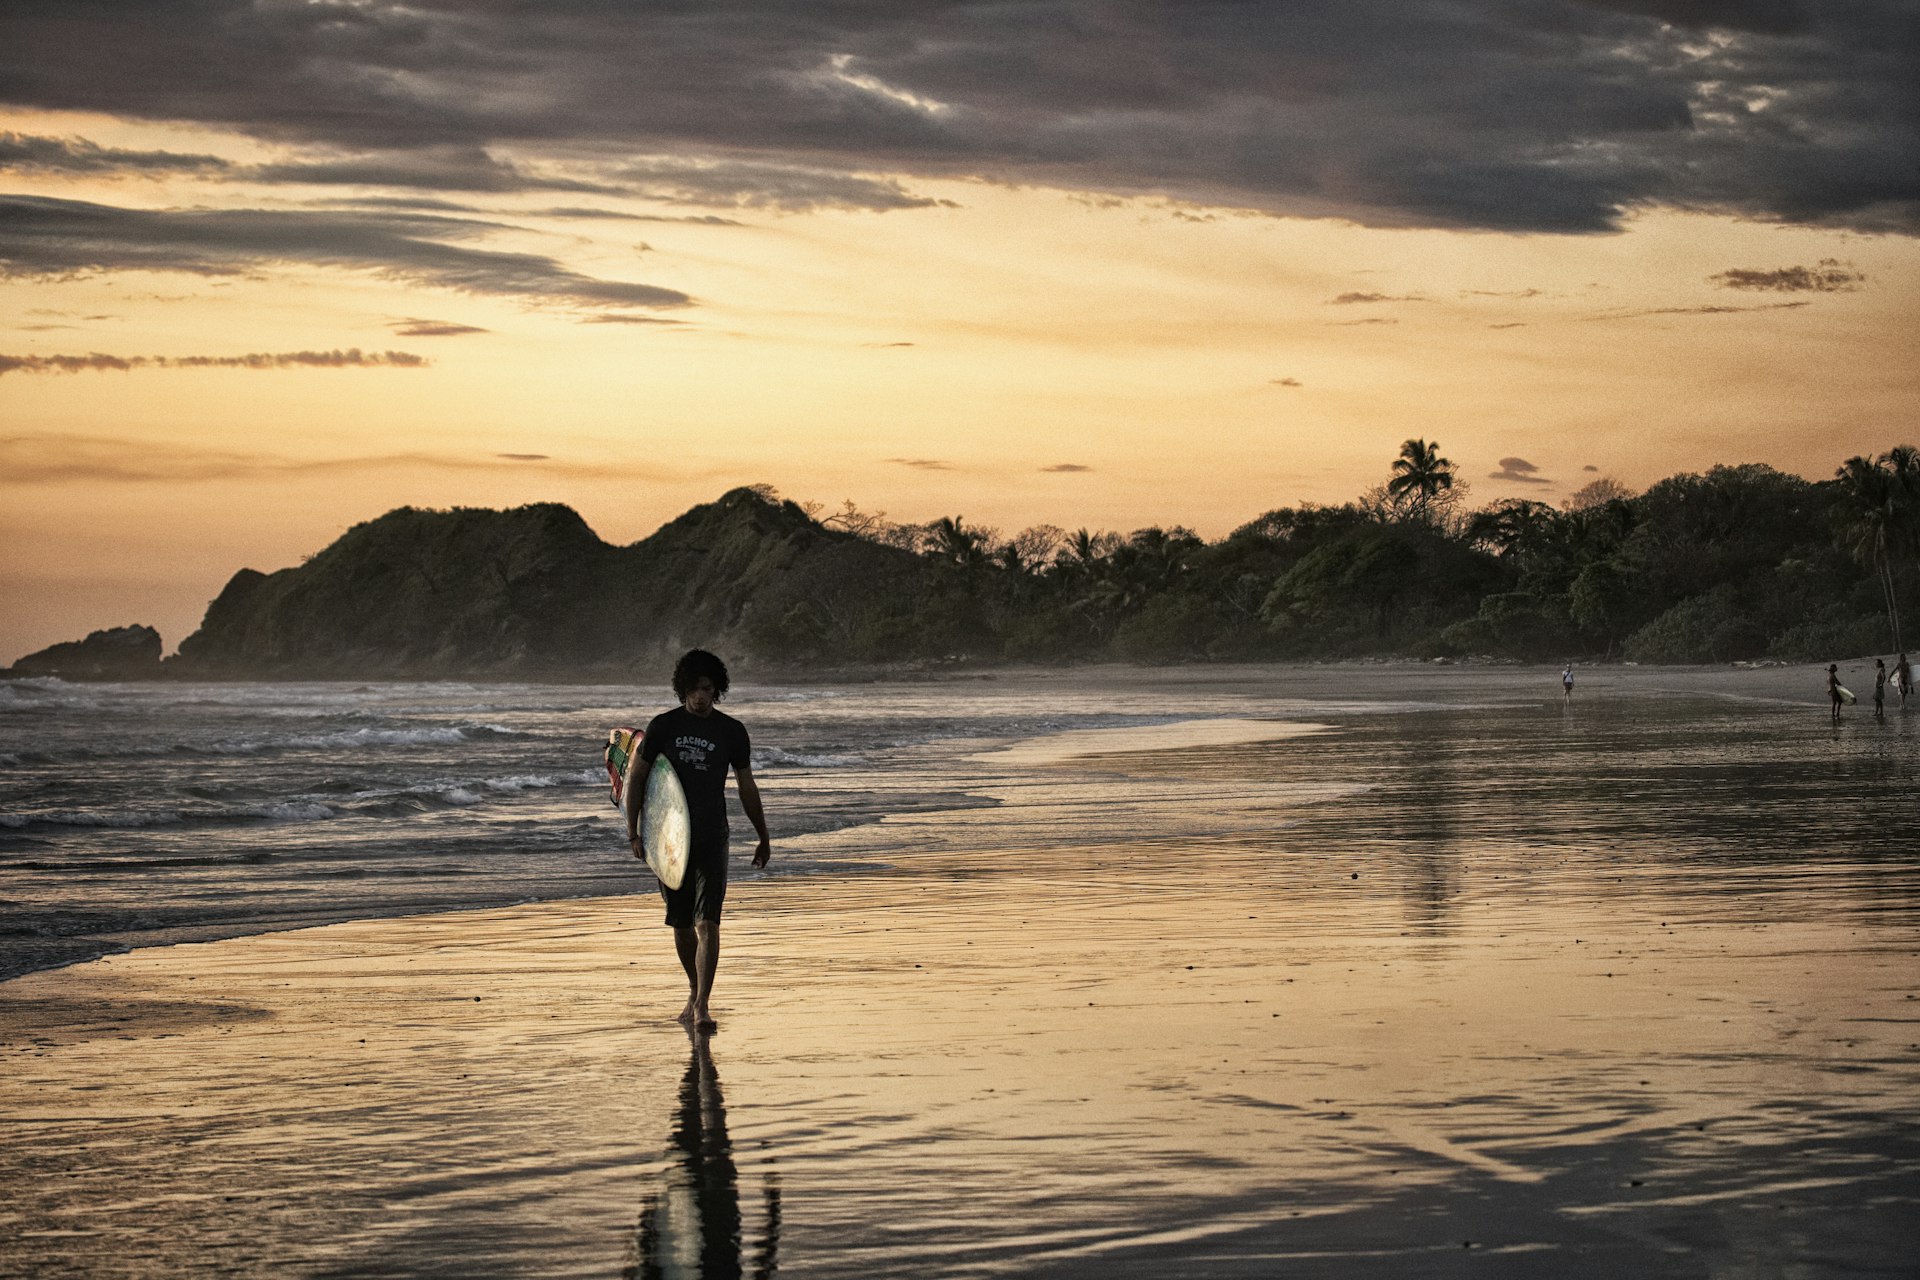 A surfer holding his board is silhouetted in the pink sunset light on Nosara Beach, Costa Rica